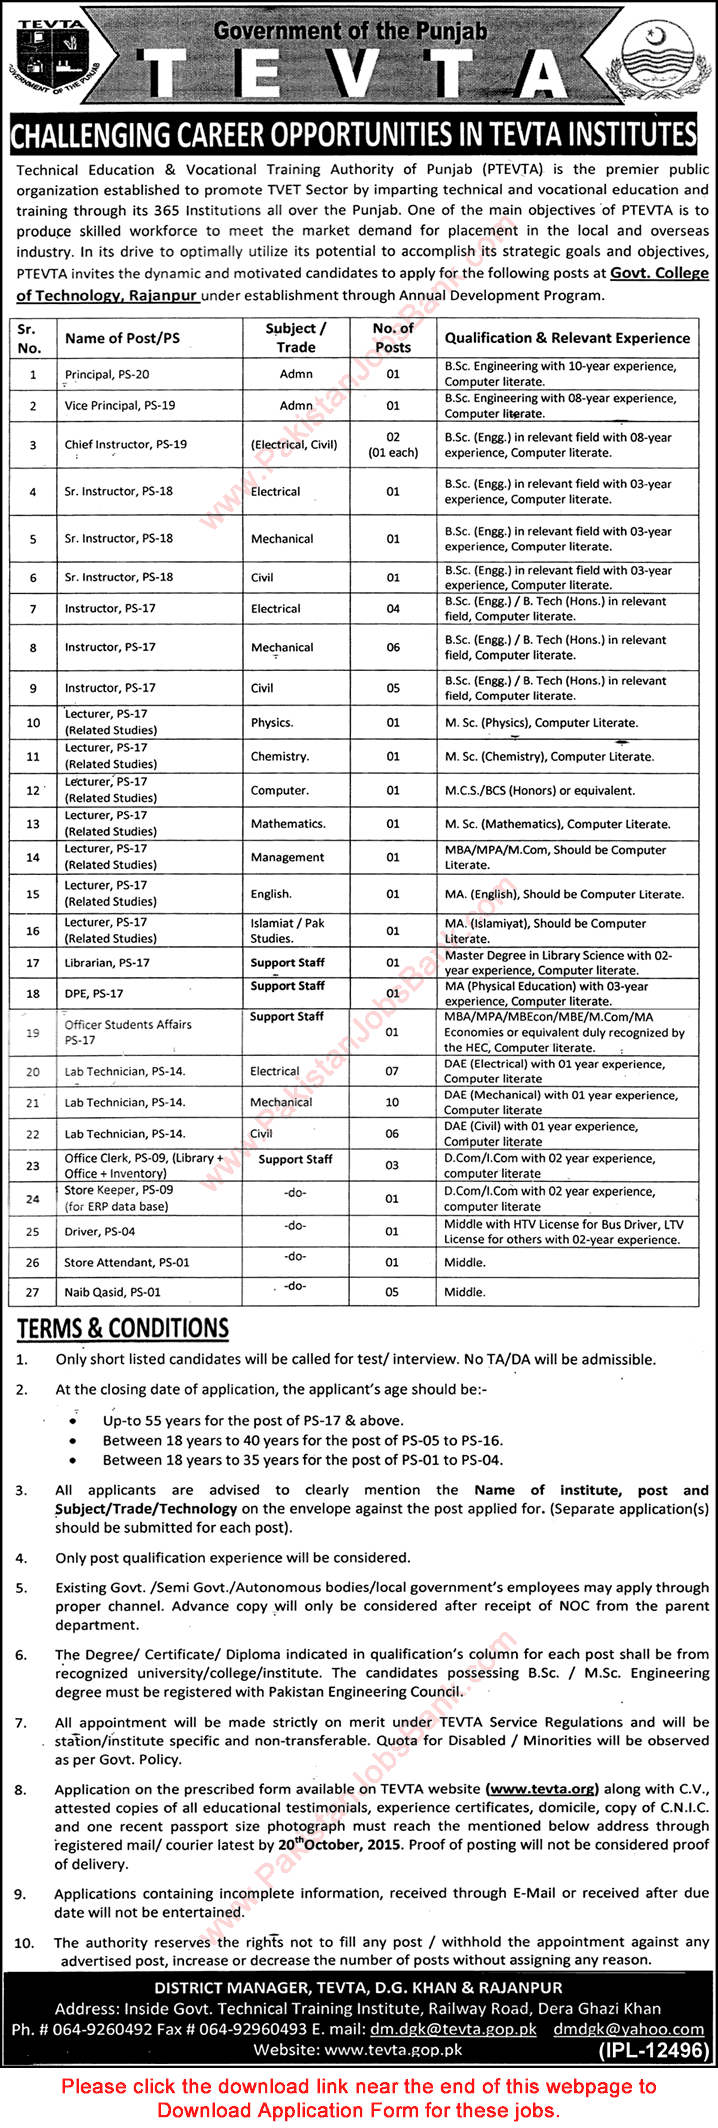 TEVTA Government College of Technology Rajanpur Jobs 2015 September Application Form Download